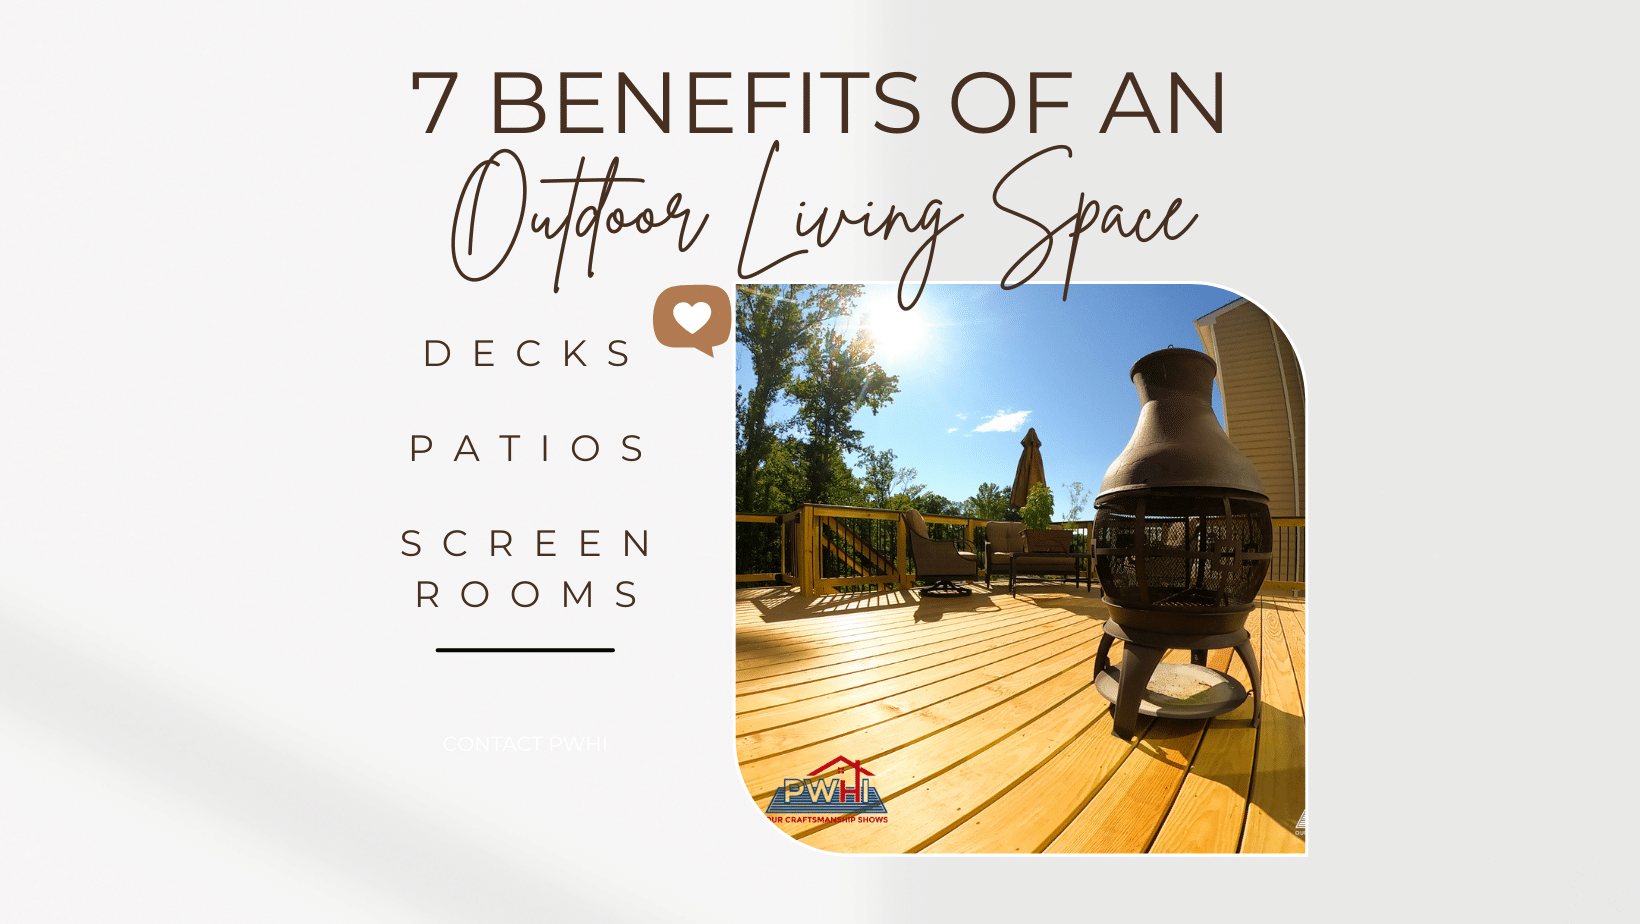 7 Benefits of an outdoor living space